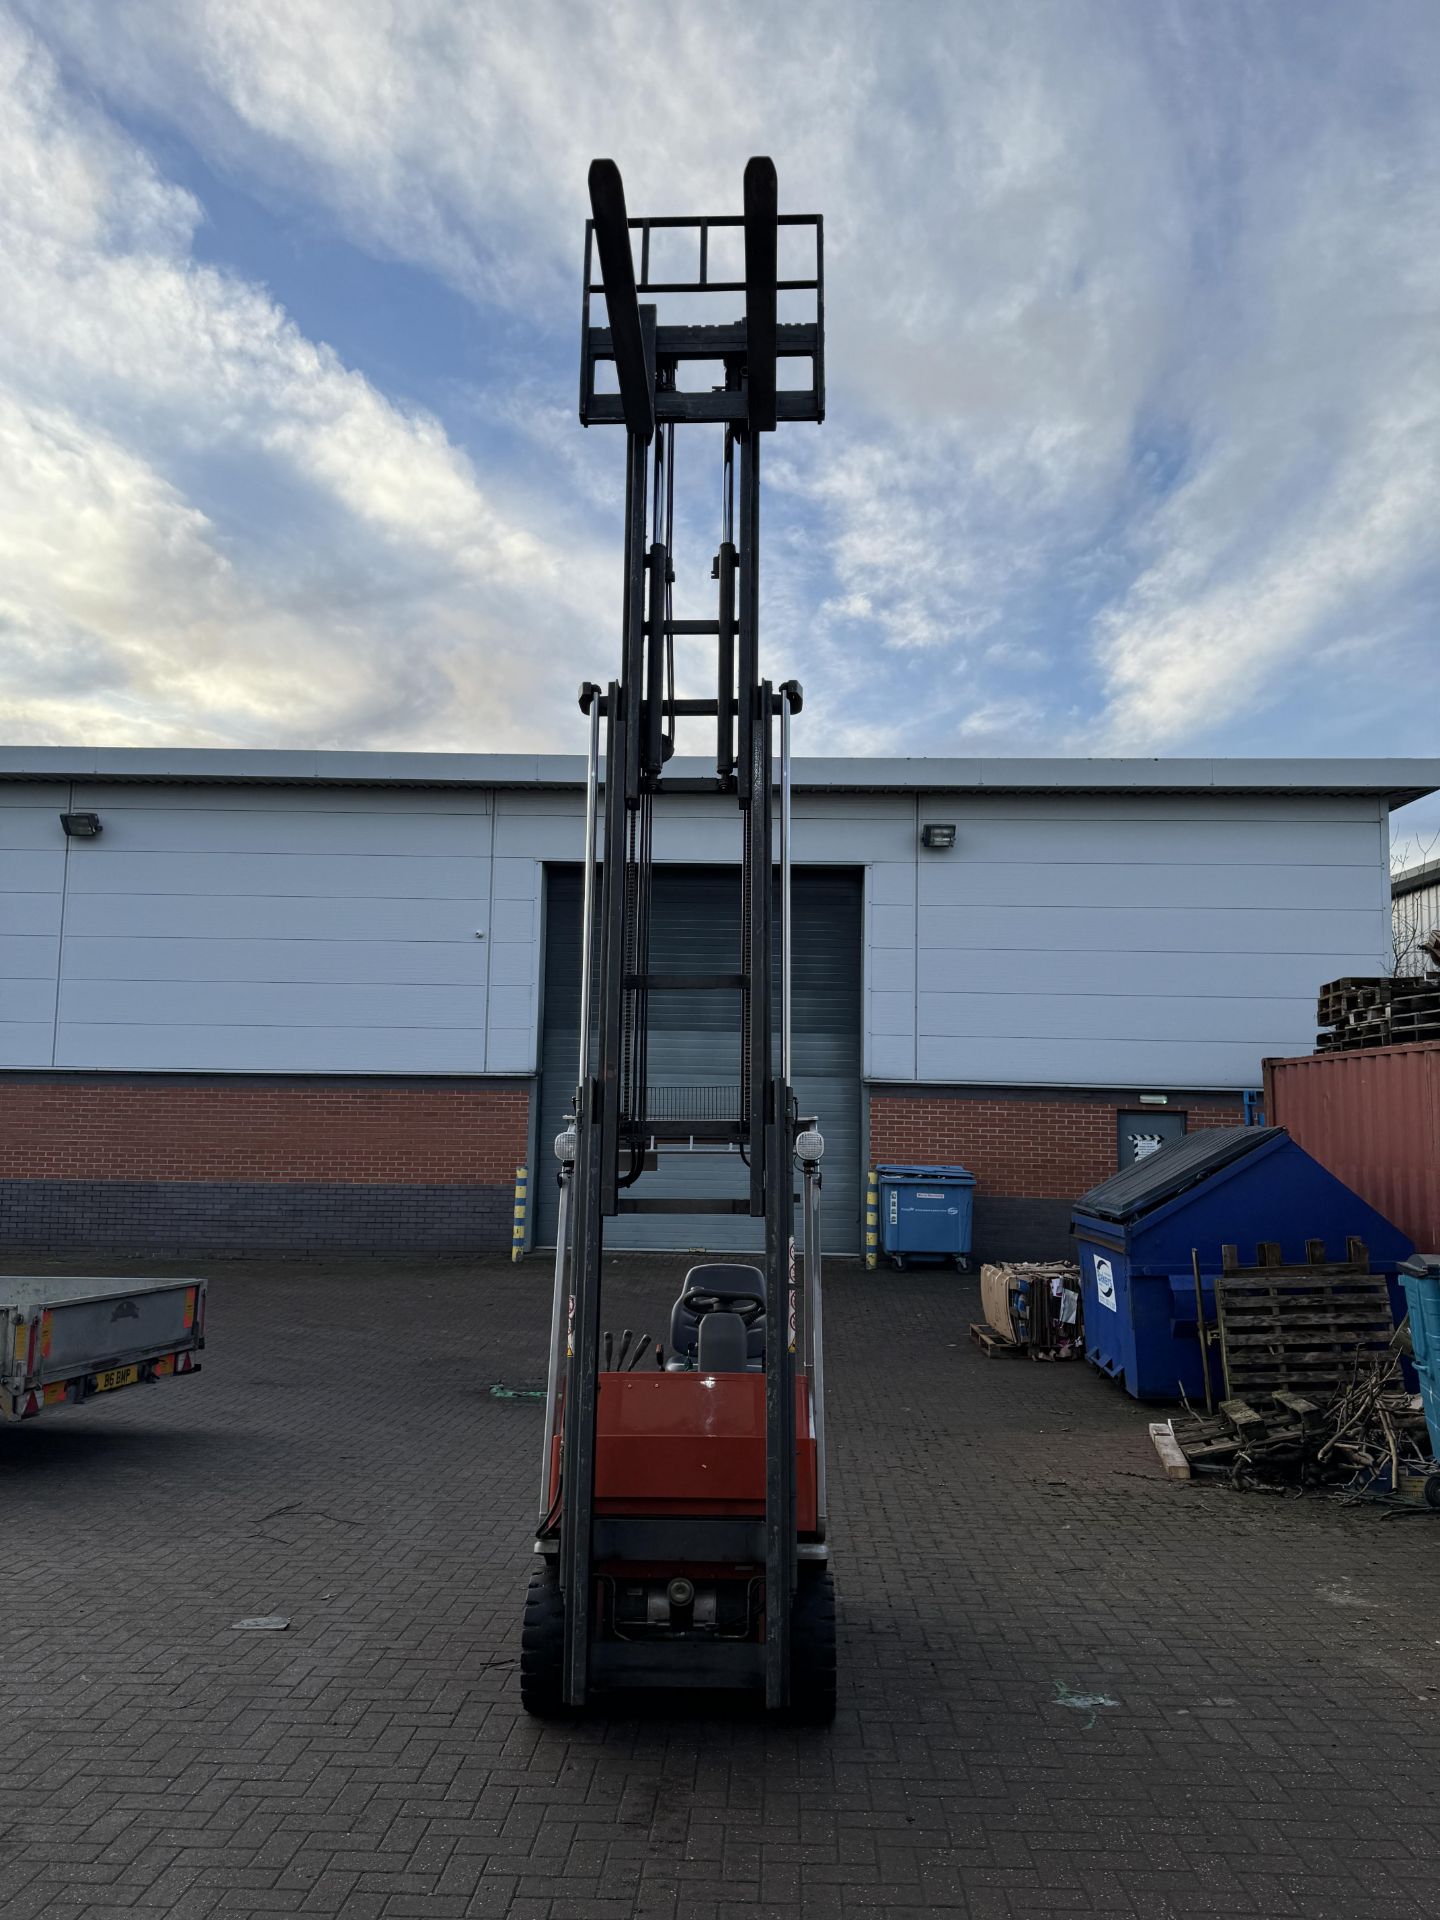 Cargo Model C 3 E 150 Tri Wheel Container Specification Electric Reach Truck - Image 14 of 28